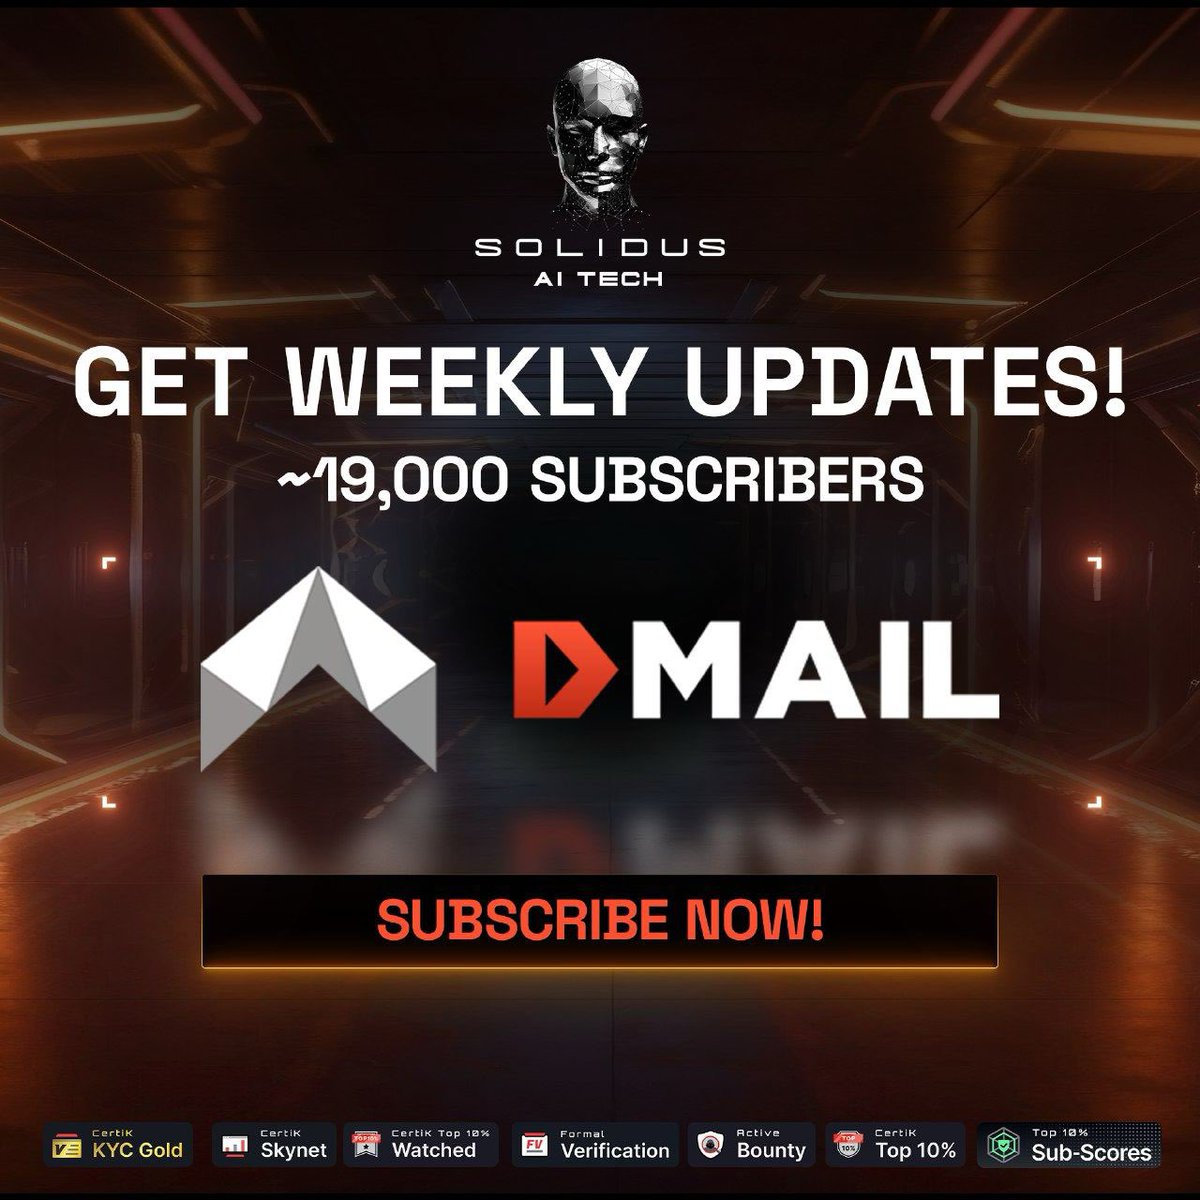 📩 AITECH on DMail!

📰 Join us on DMail for weekly updates and exclusive newsletters. Our community is growing rapidly, with nearly 19,000 subscribers.

➡️ Subscribe Now: dmail.ai/sub/aitech